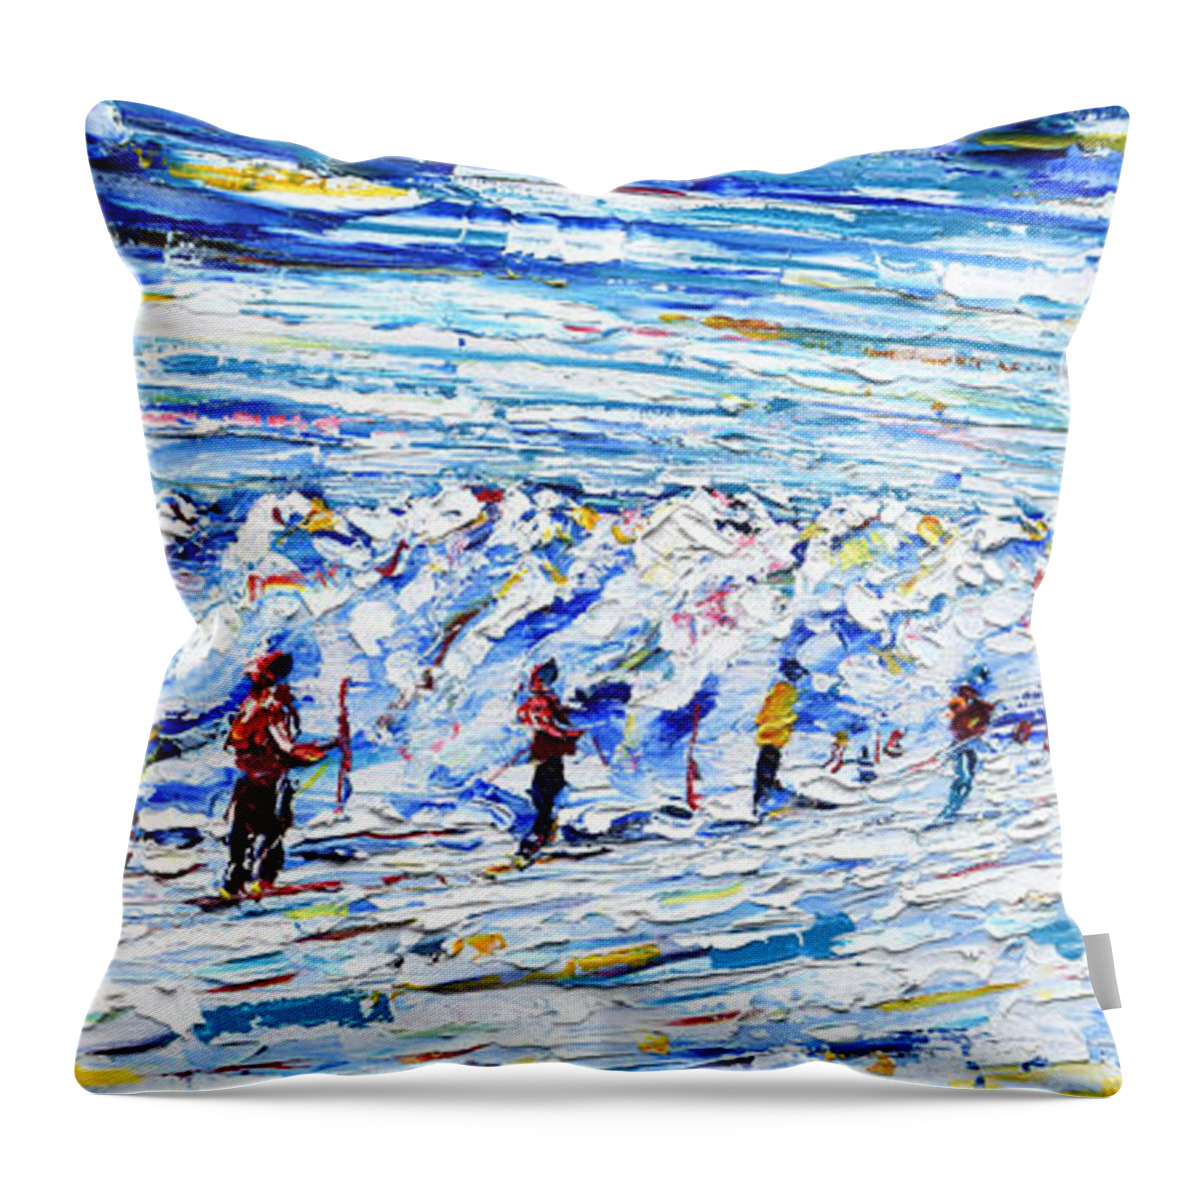 Grande Motte Throw Pillow featuring the painting Grande Motte Glacier Tignes by Pete Caswell